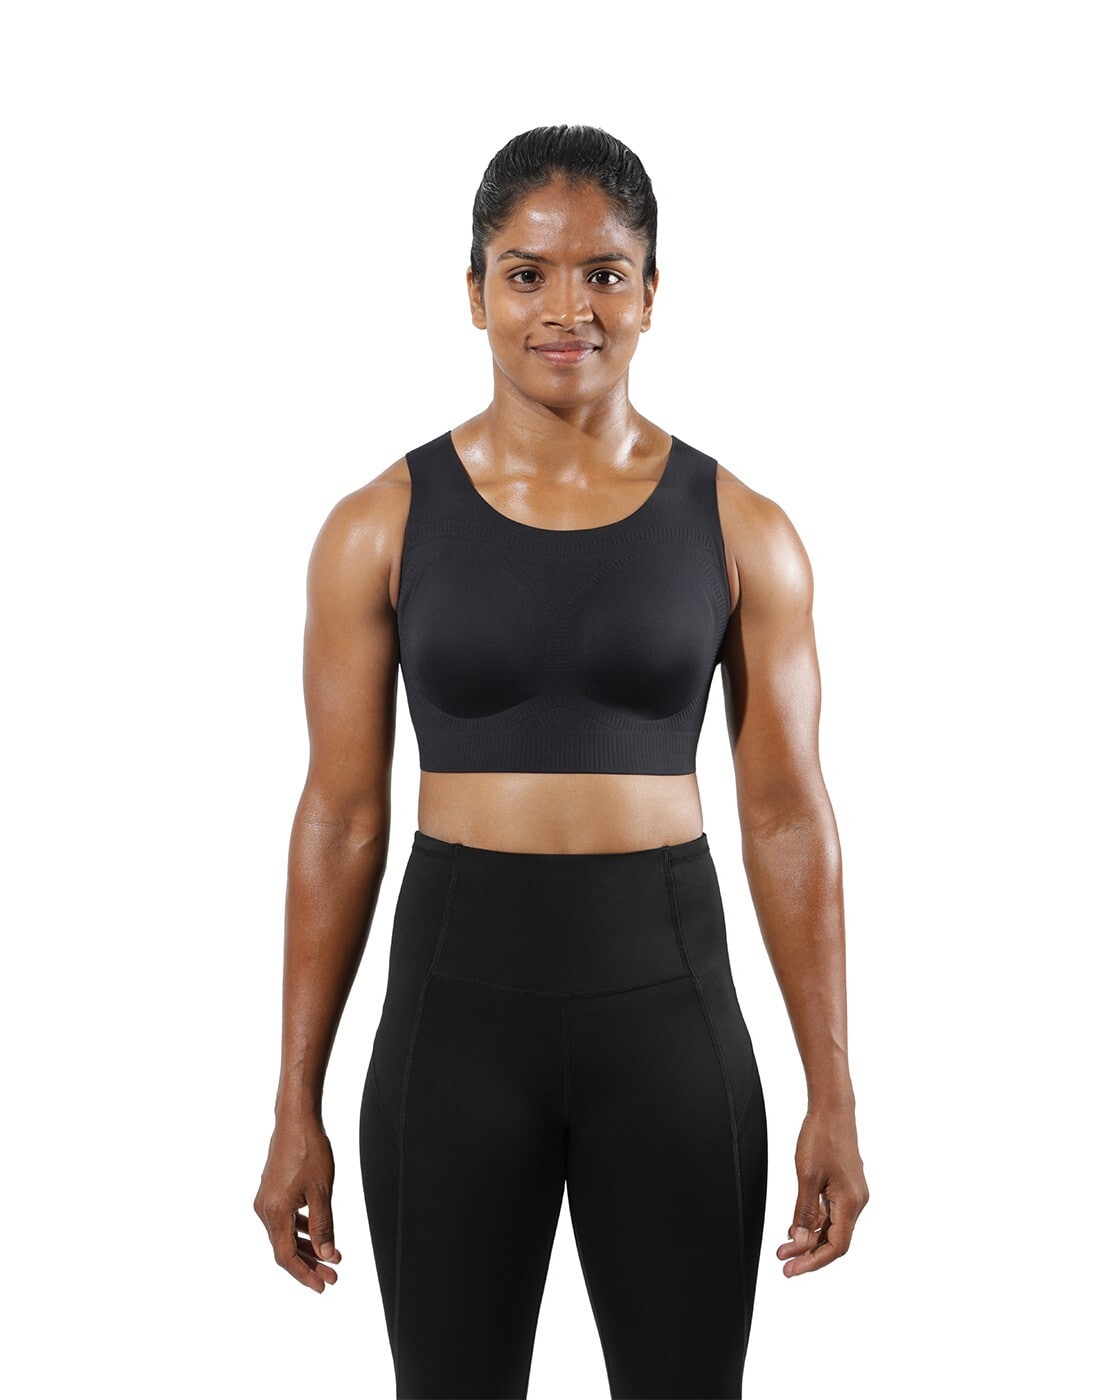 Limitless Non Wired Sports Bra, Lilybod